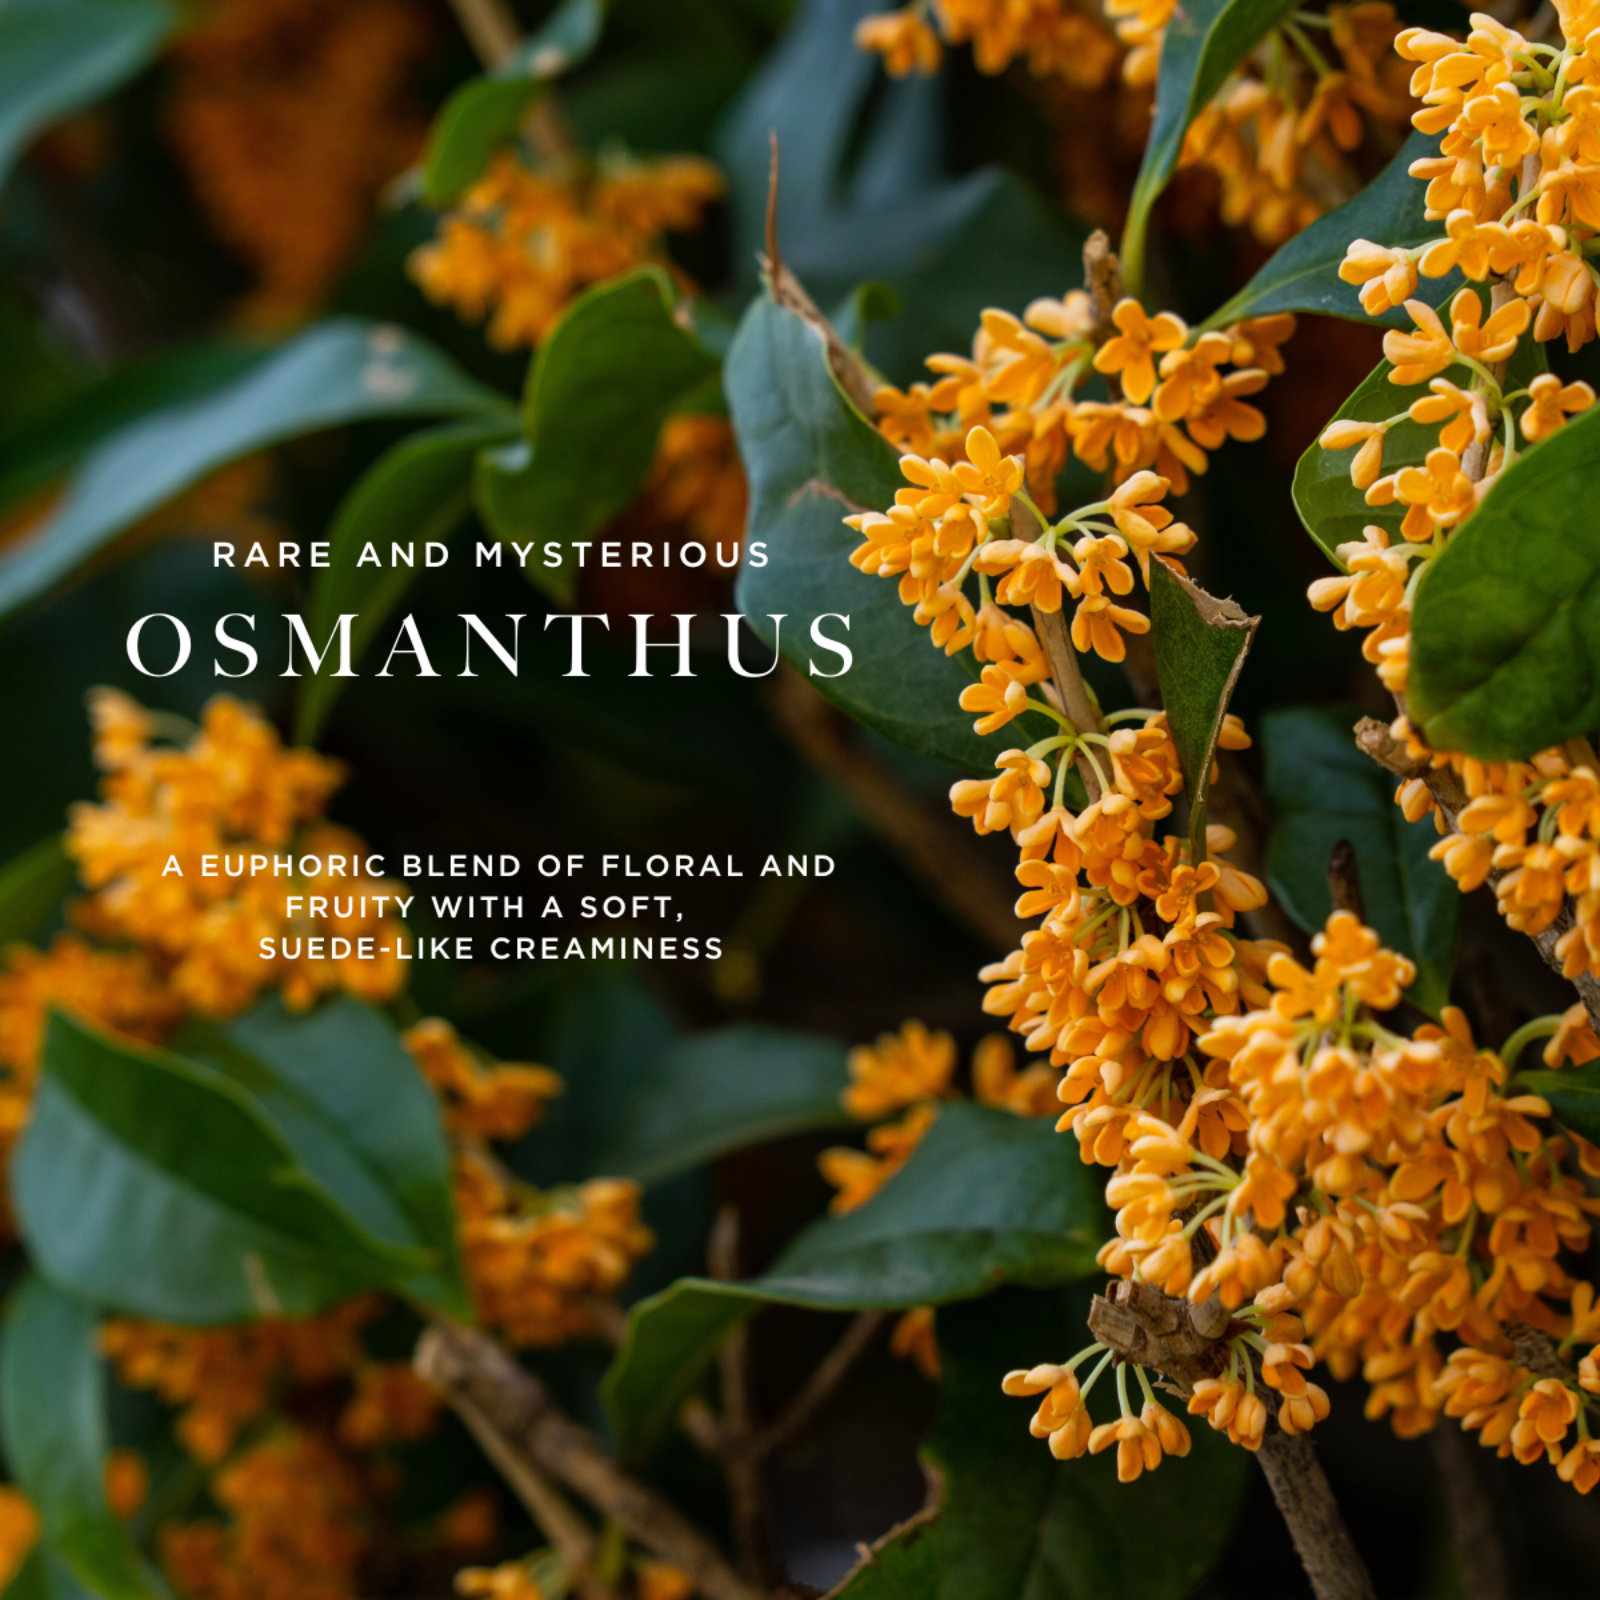 Caswell-Massey OAIRE Eau de Parfum for Men: image of osmanthus flowers with "Osmanthus" to represent one of the scent notes